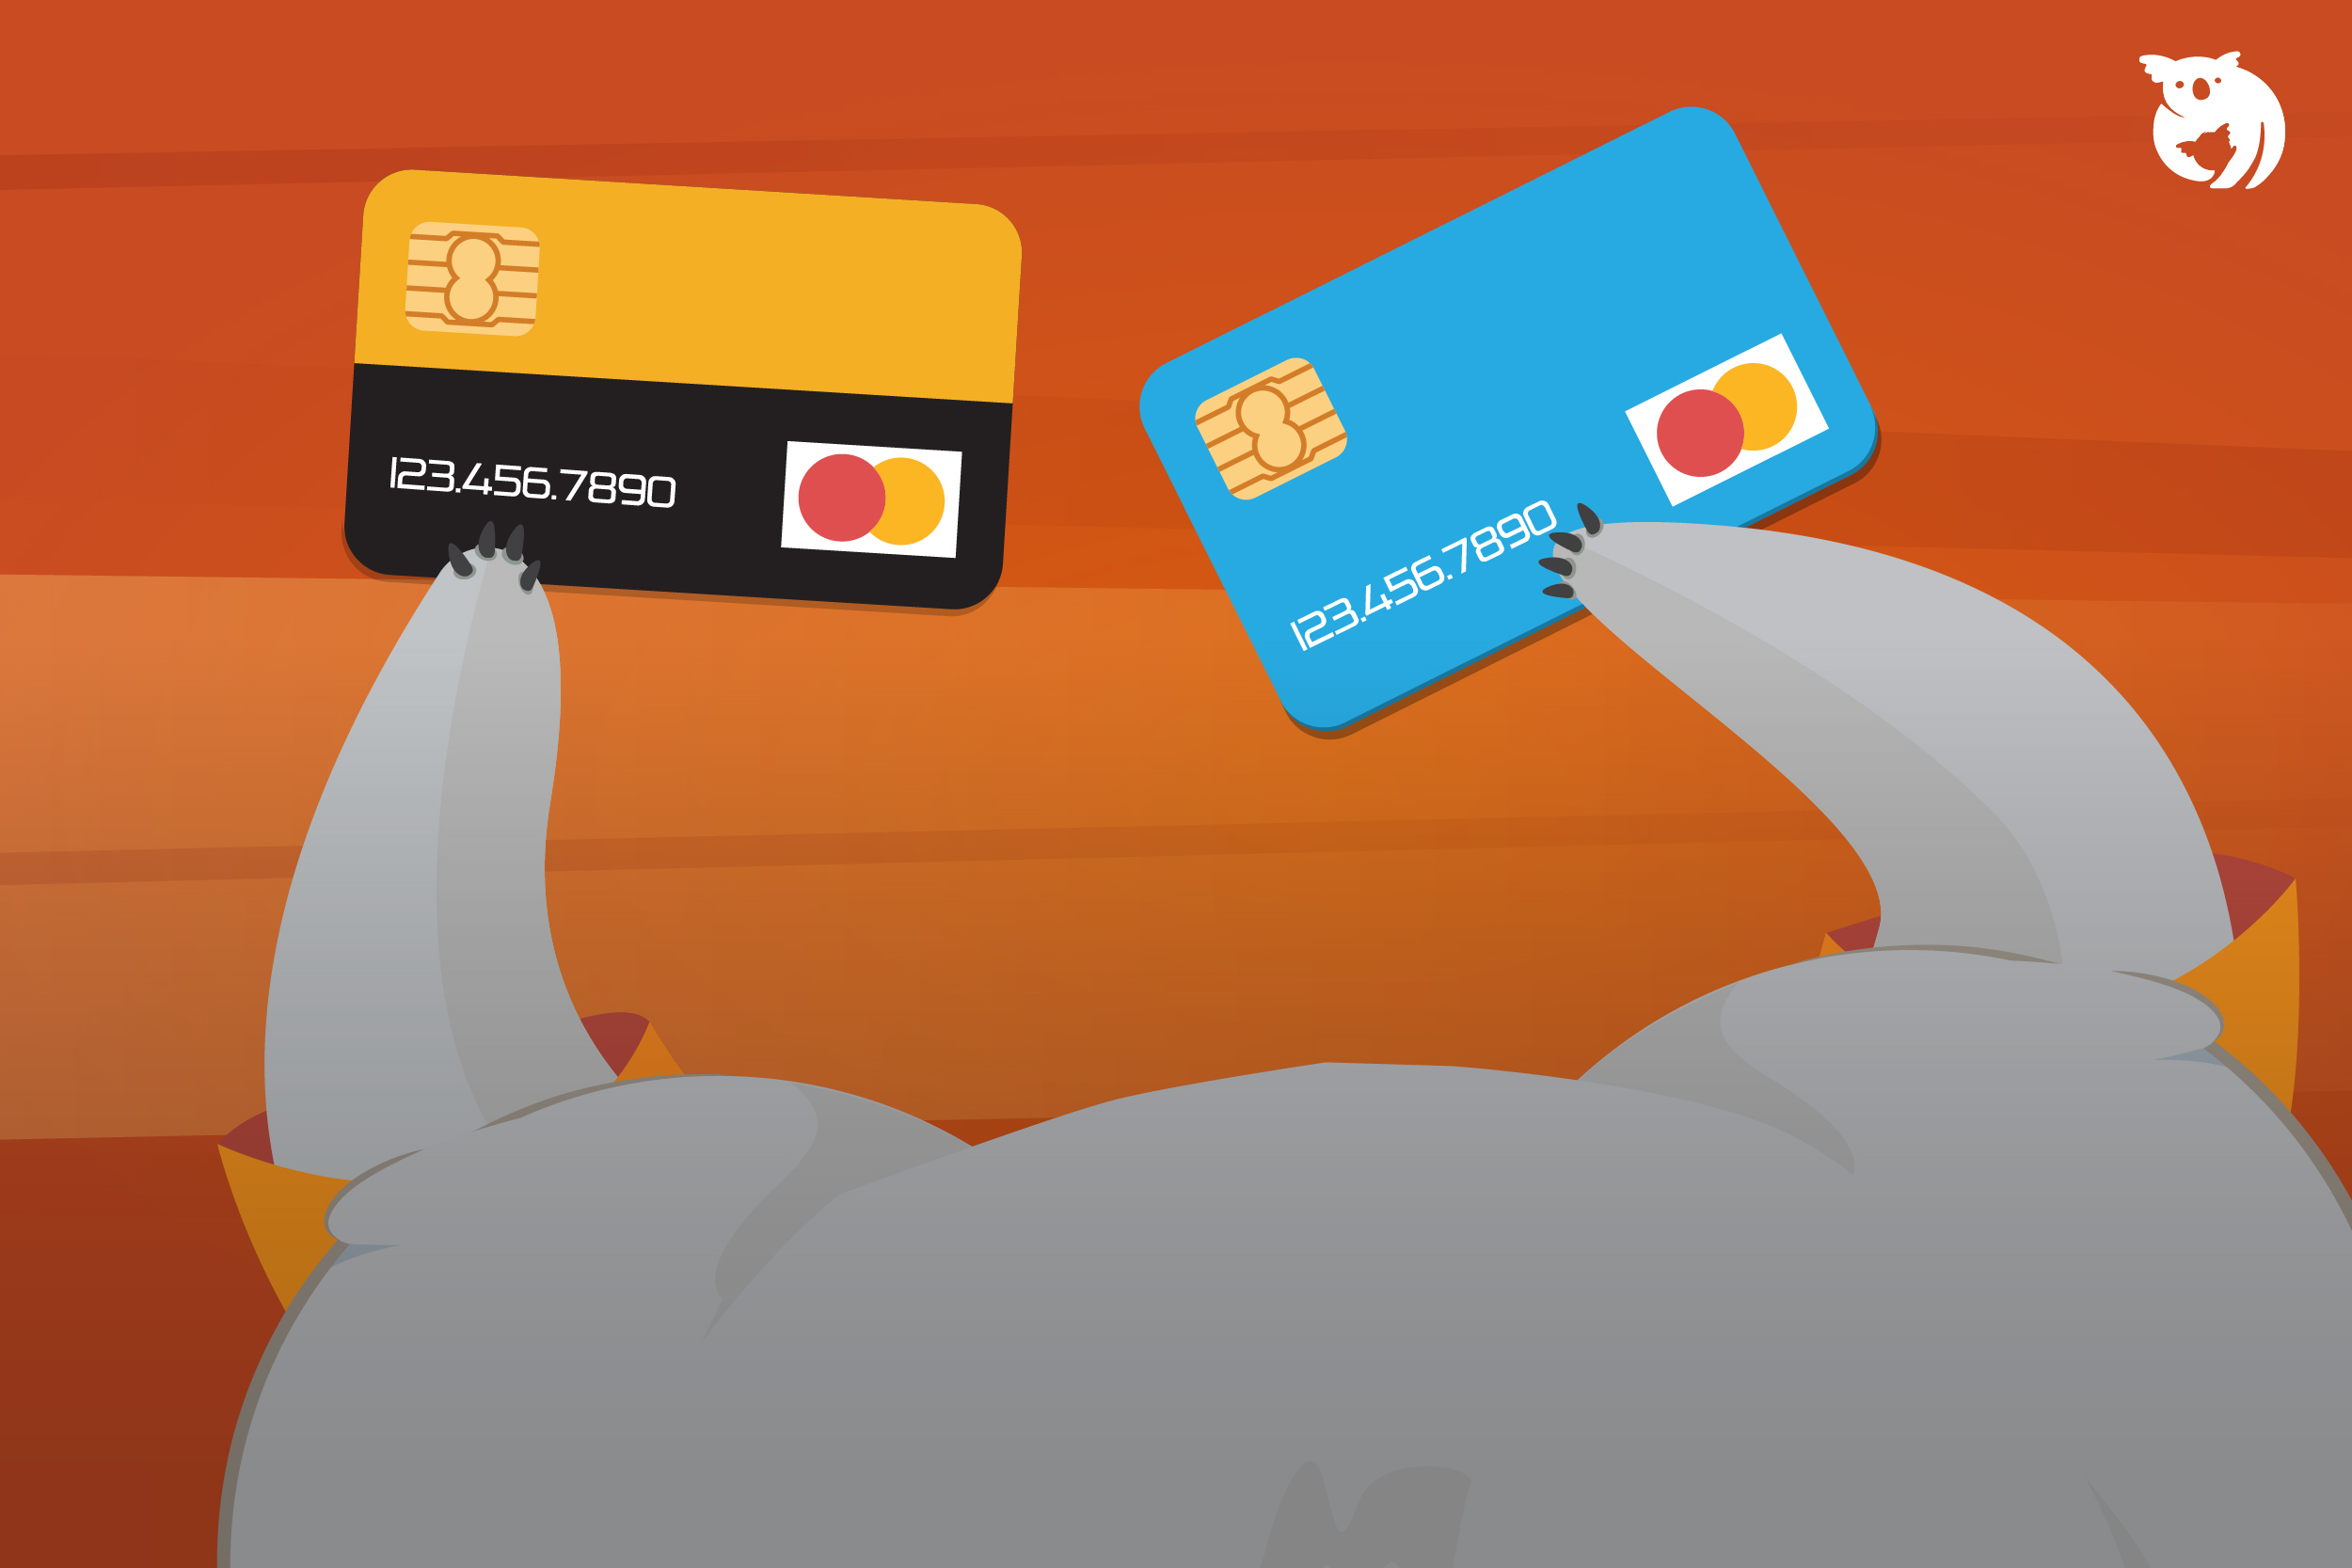 Advantages, Disadvantages & How to Use Credit Card Wisely